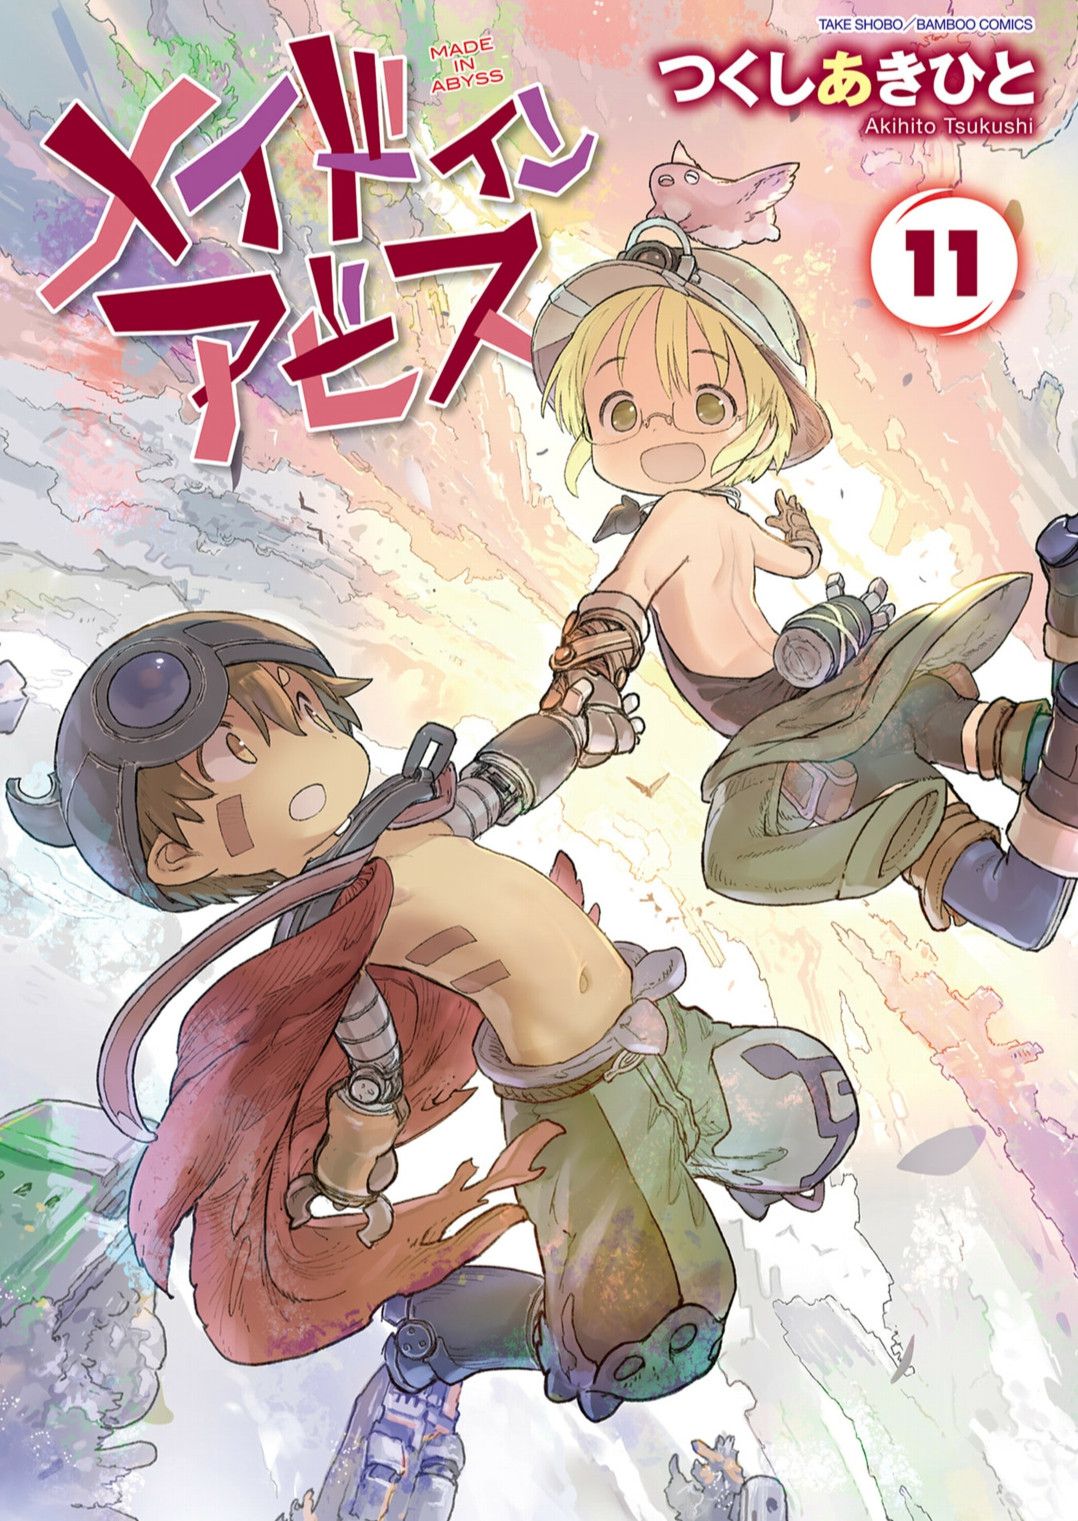 【Sad news】 Made in Abyss latest book, finally lifting the ban on girls' nipples wwwwwww 3